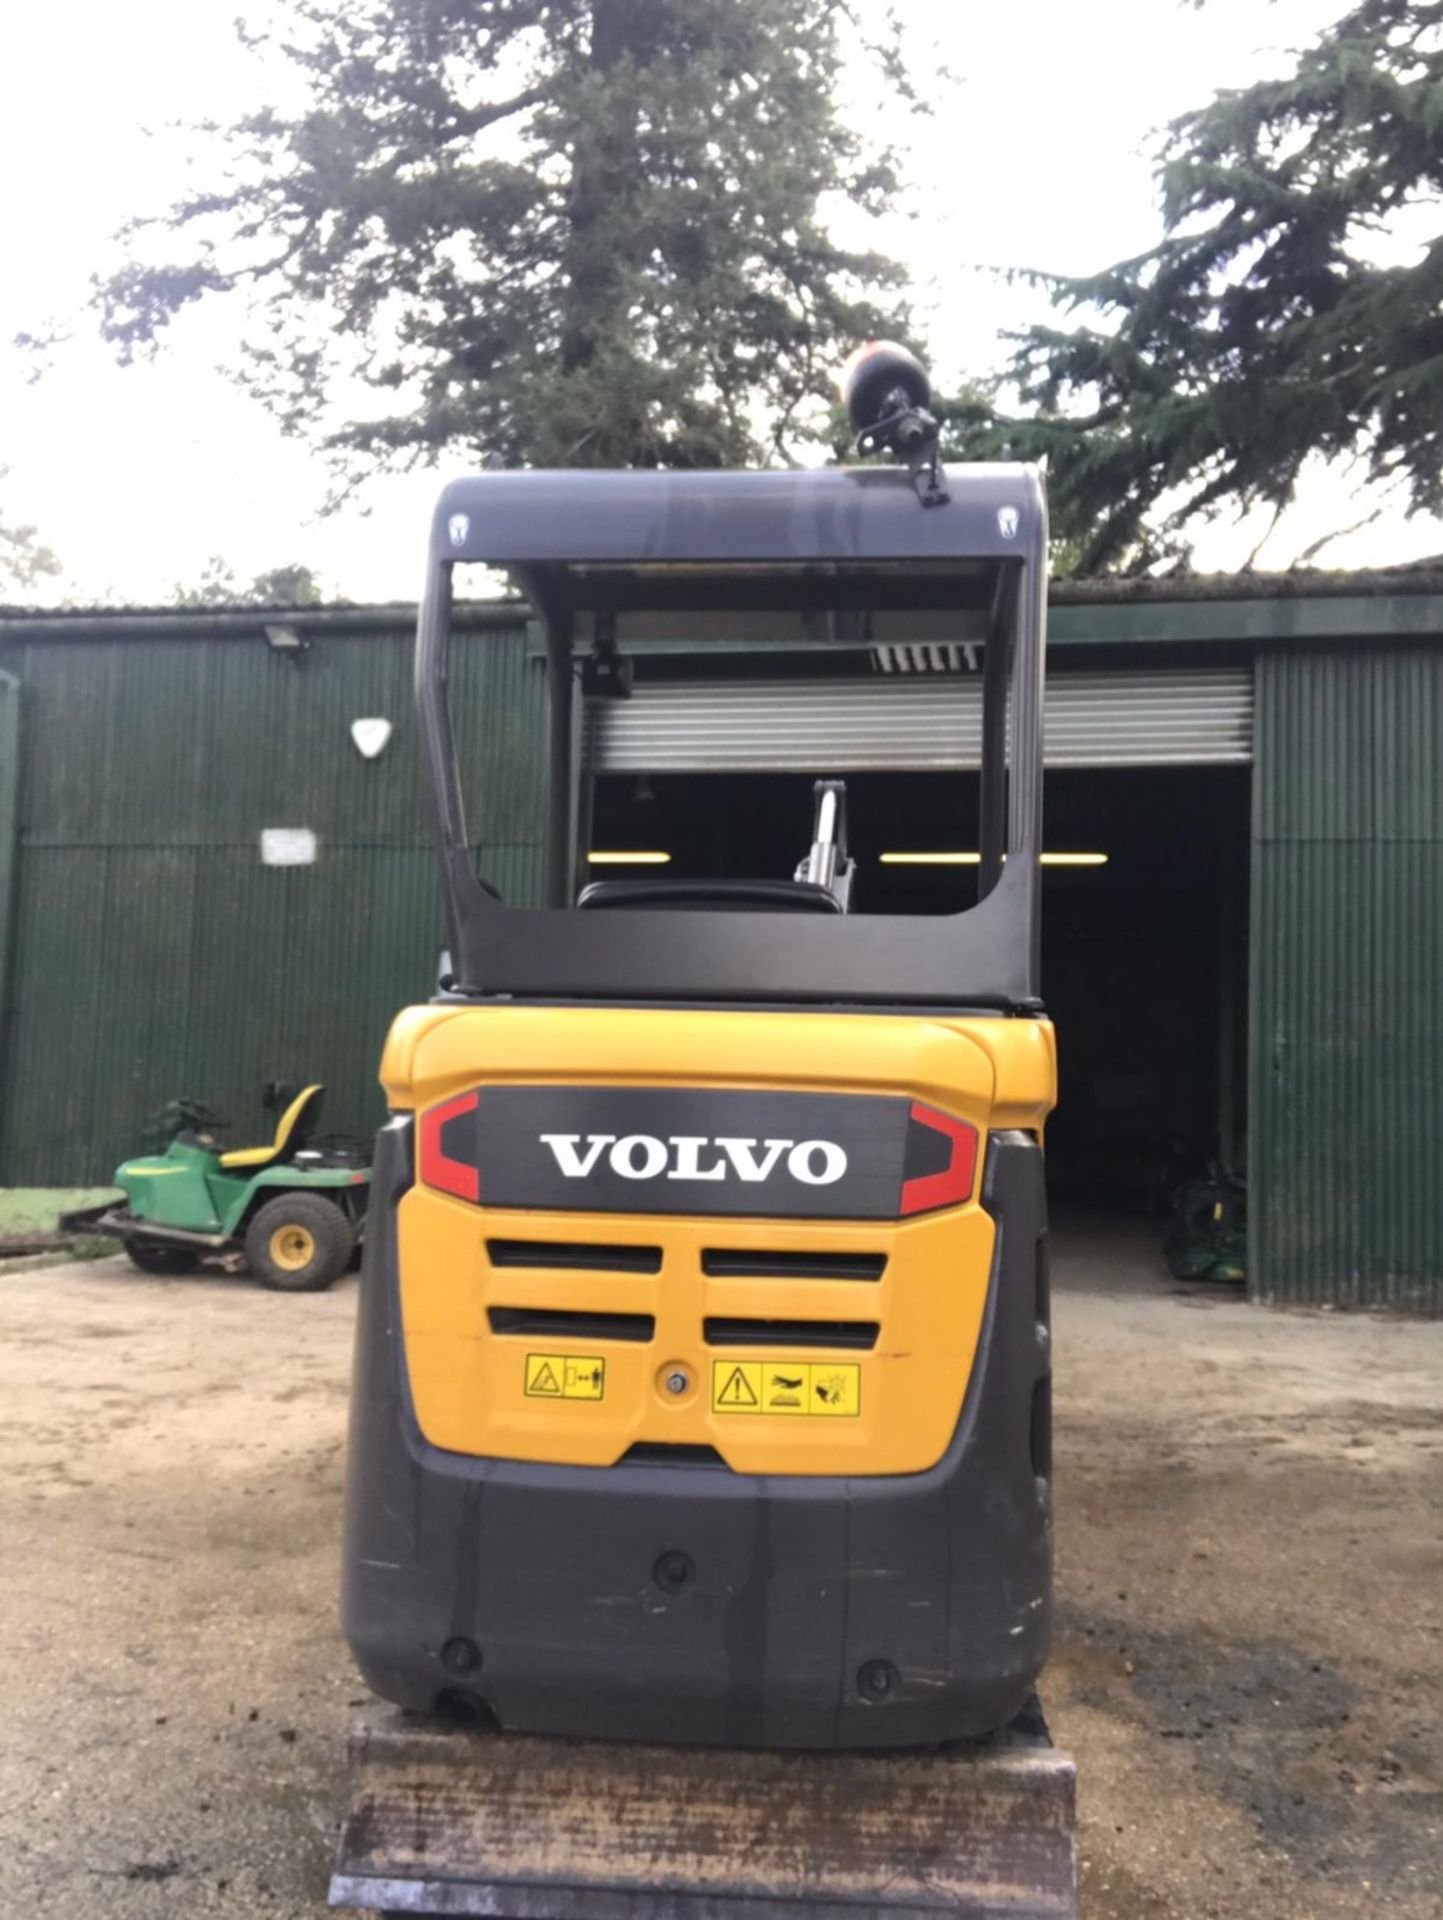 VOLVO EC15D 1.5 TONNE MINI DIGGER WITH SET OF BUCKETS YEAR 2015 BUILD. OWNED BY SELLER FROM NEW - Image 17 of 18